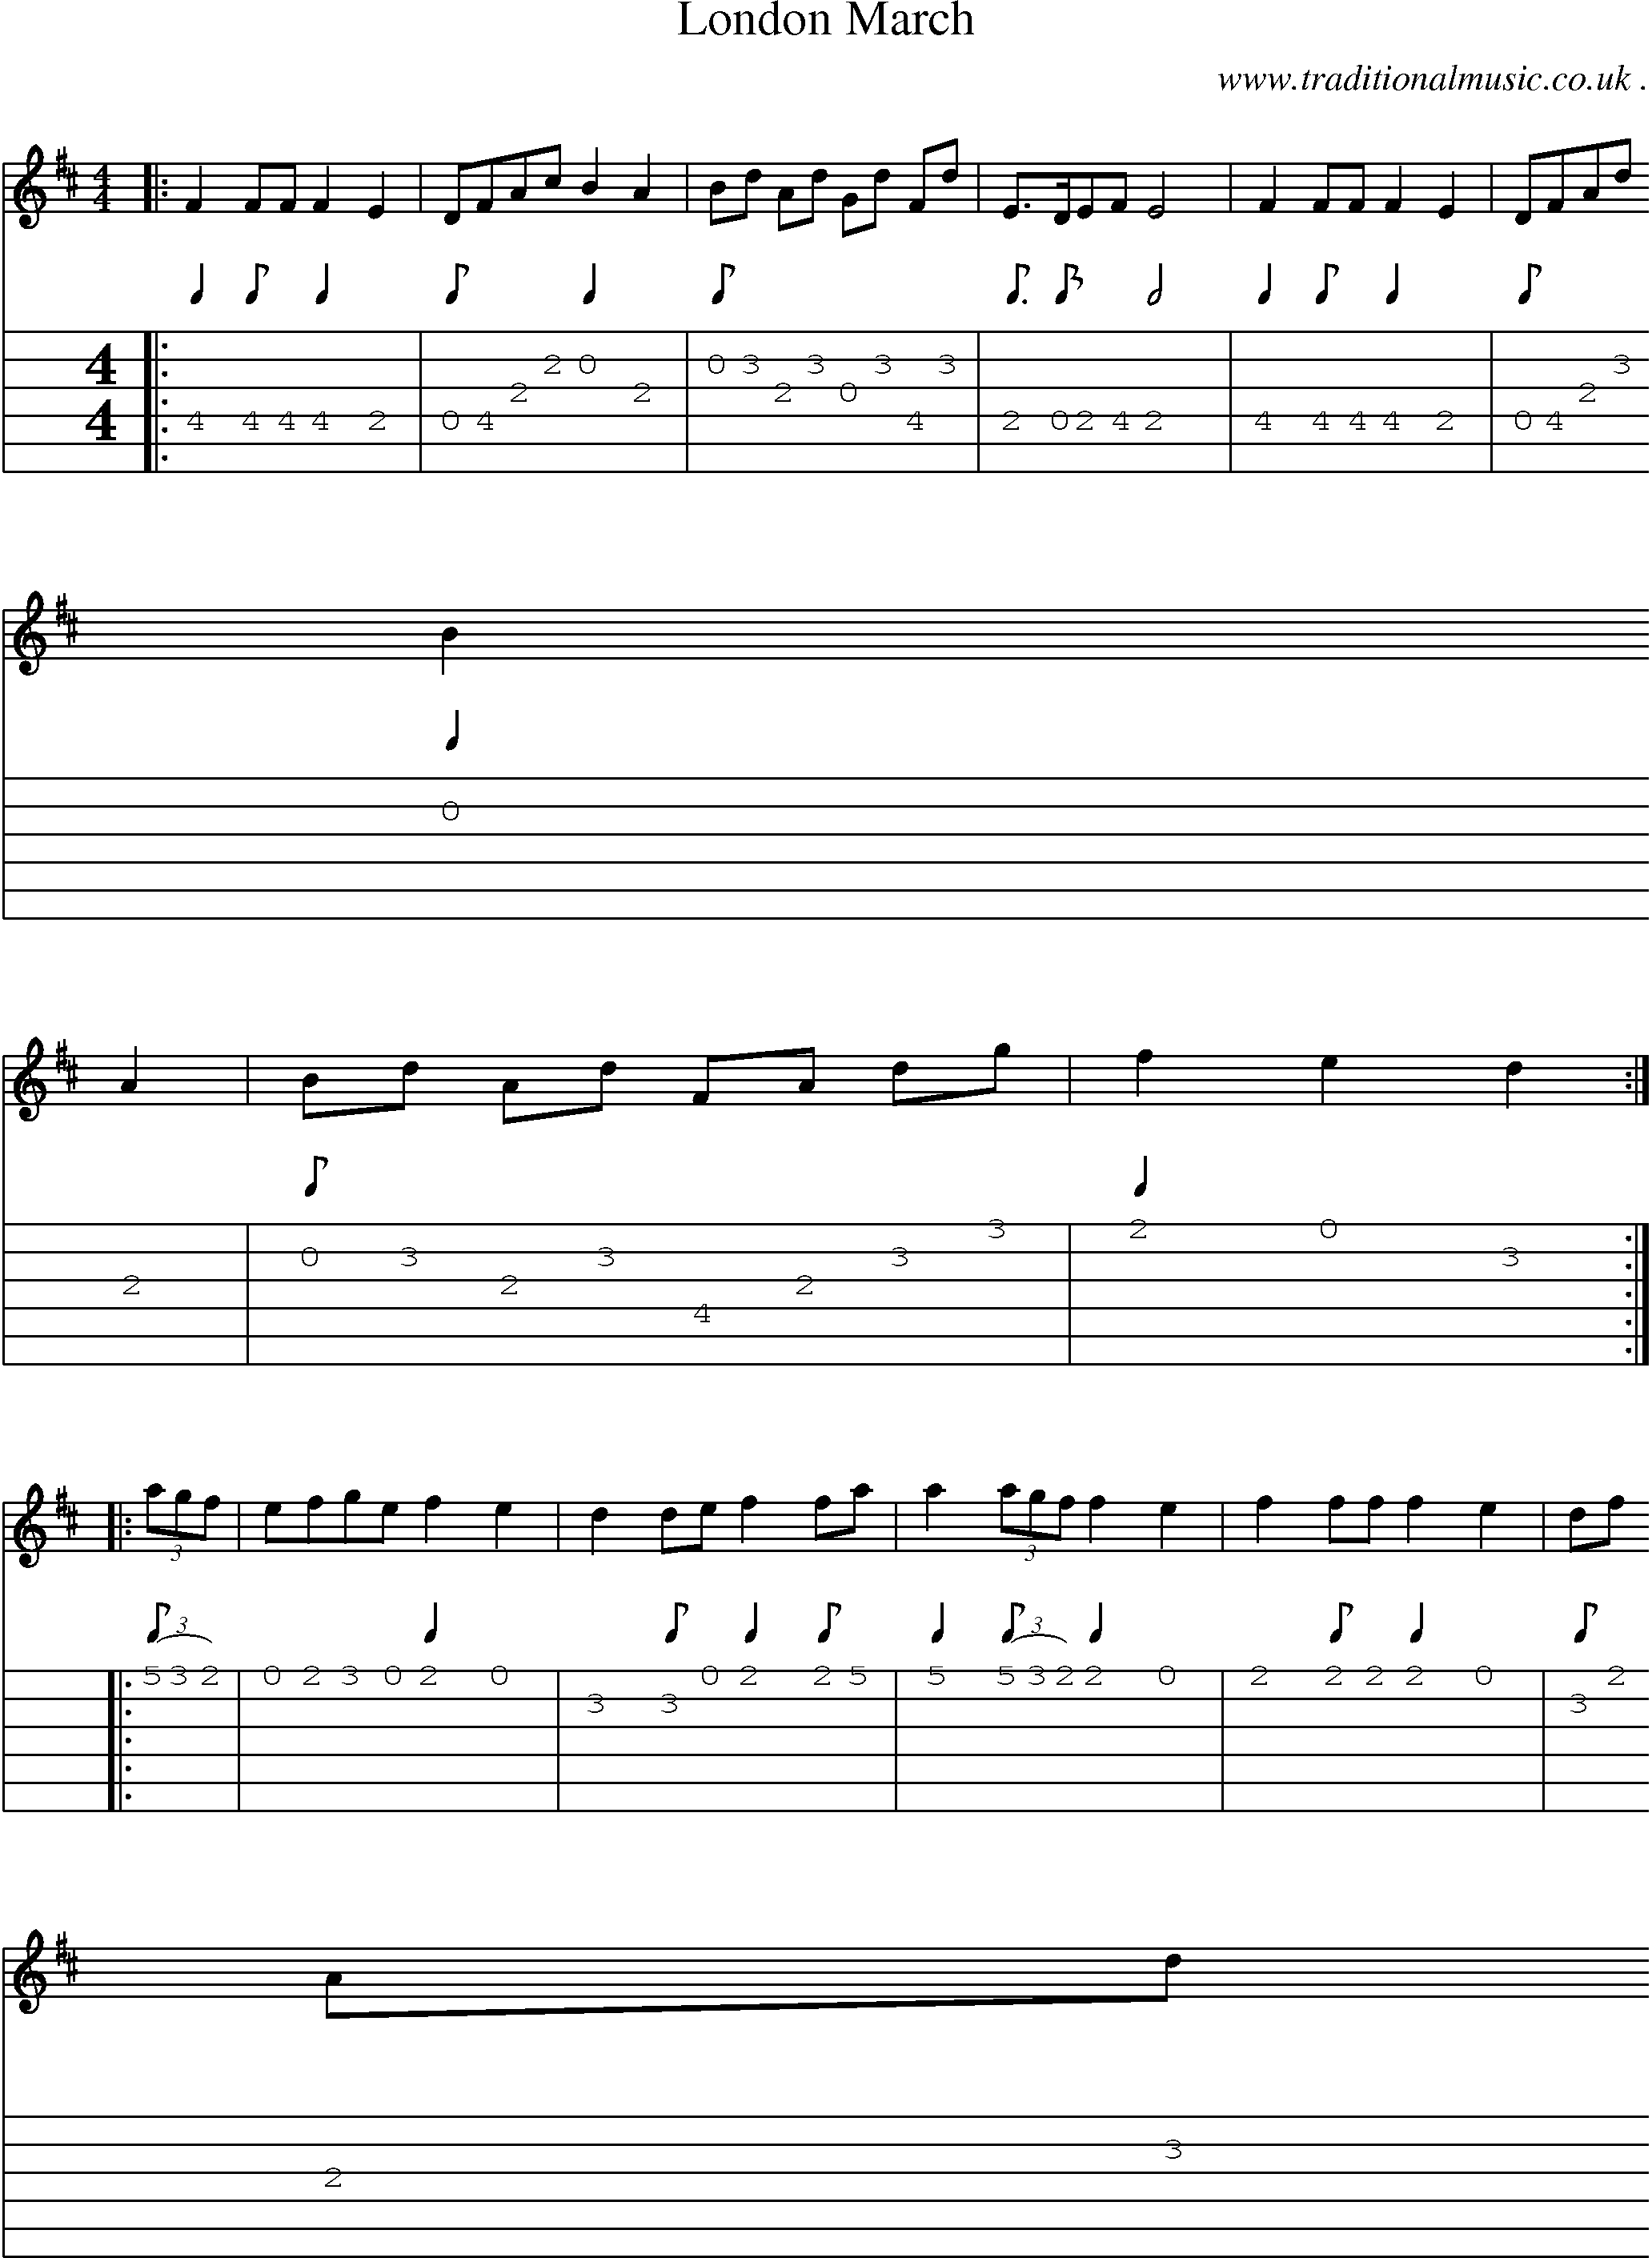 Sheet-Music and Guitar Tabs for London March